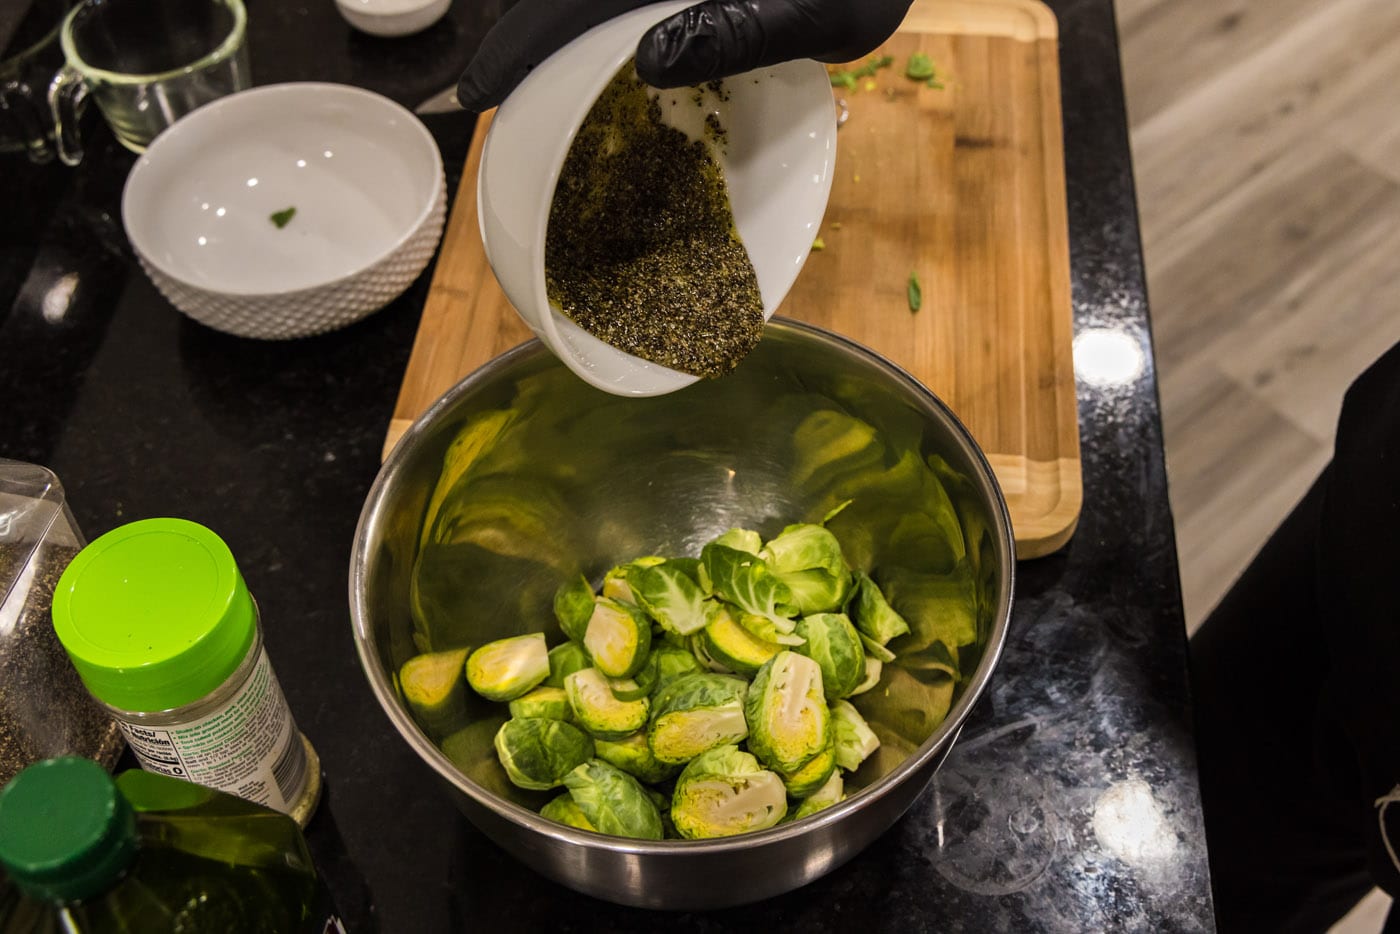 pouring olive oil mixture over brussels sprouts